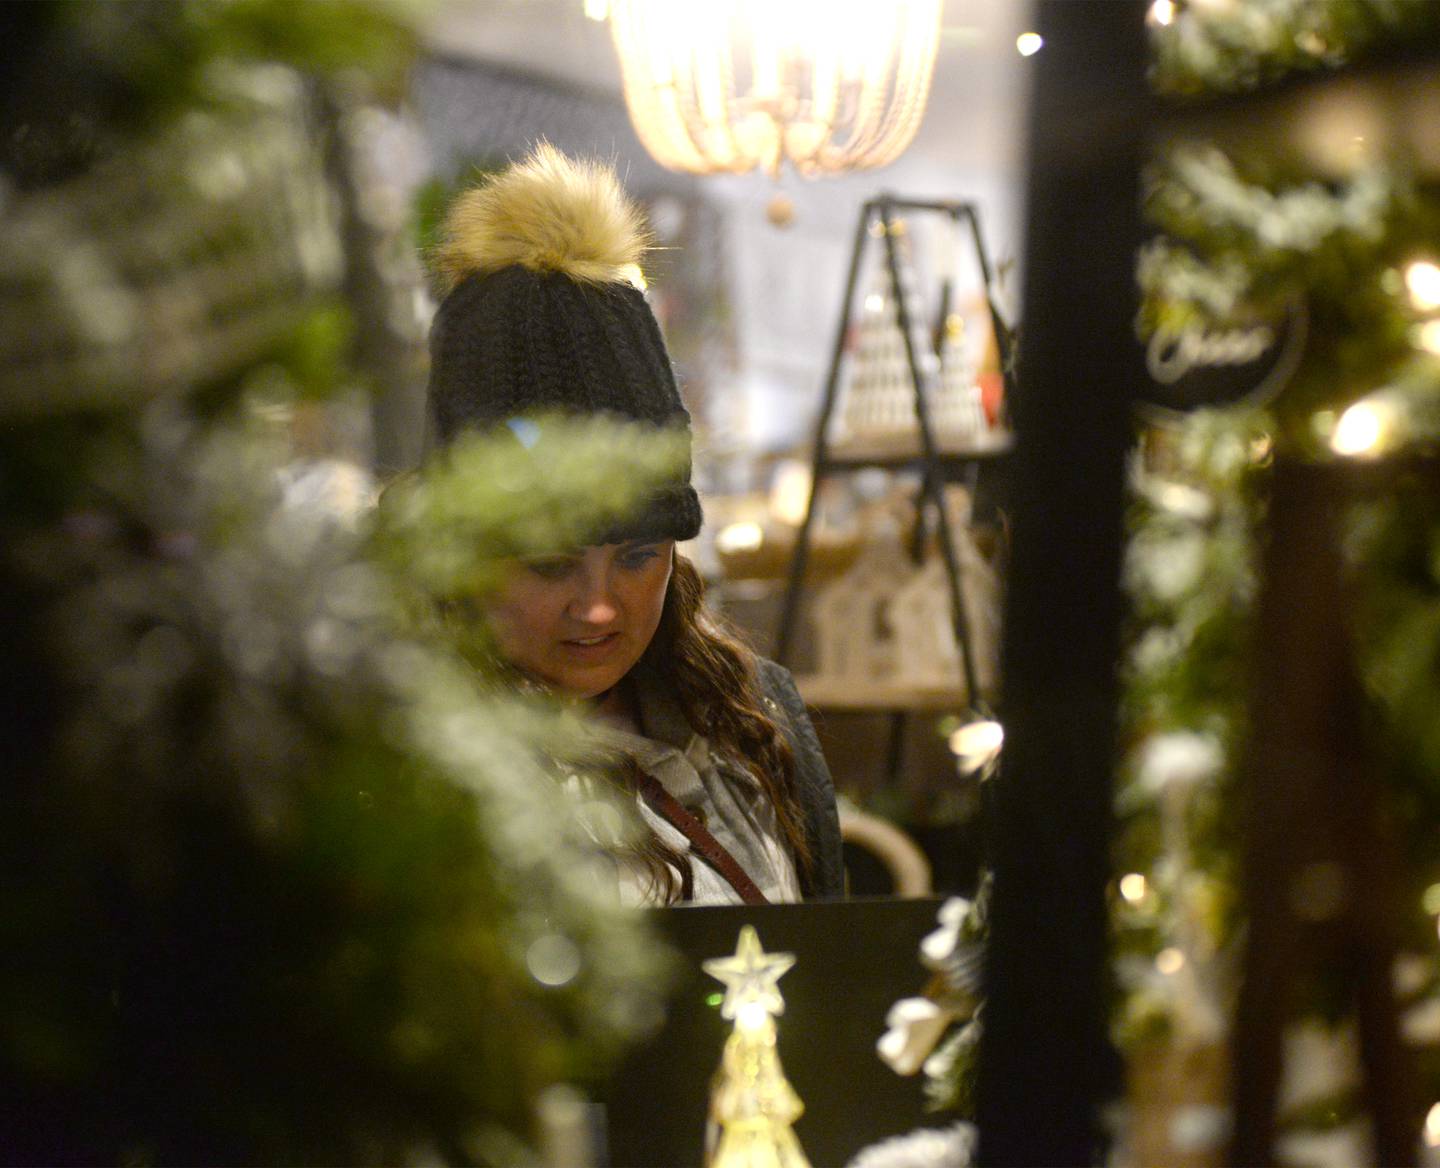 Shopping at local shops was one of the attractions at Oregon's Candlelight Walk on Saturday, Nov. 25. 2023. The event also included Christmas music, kids activities, and visits with Santa.